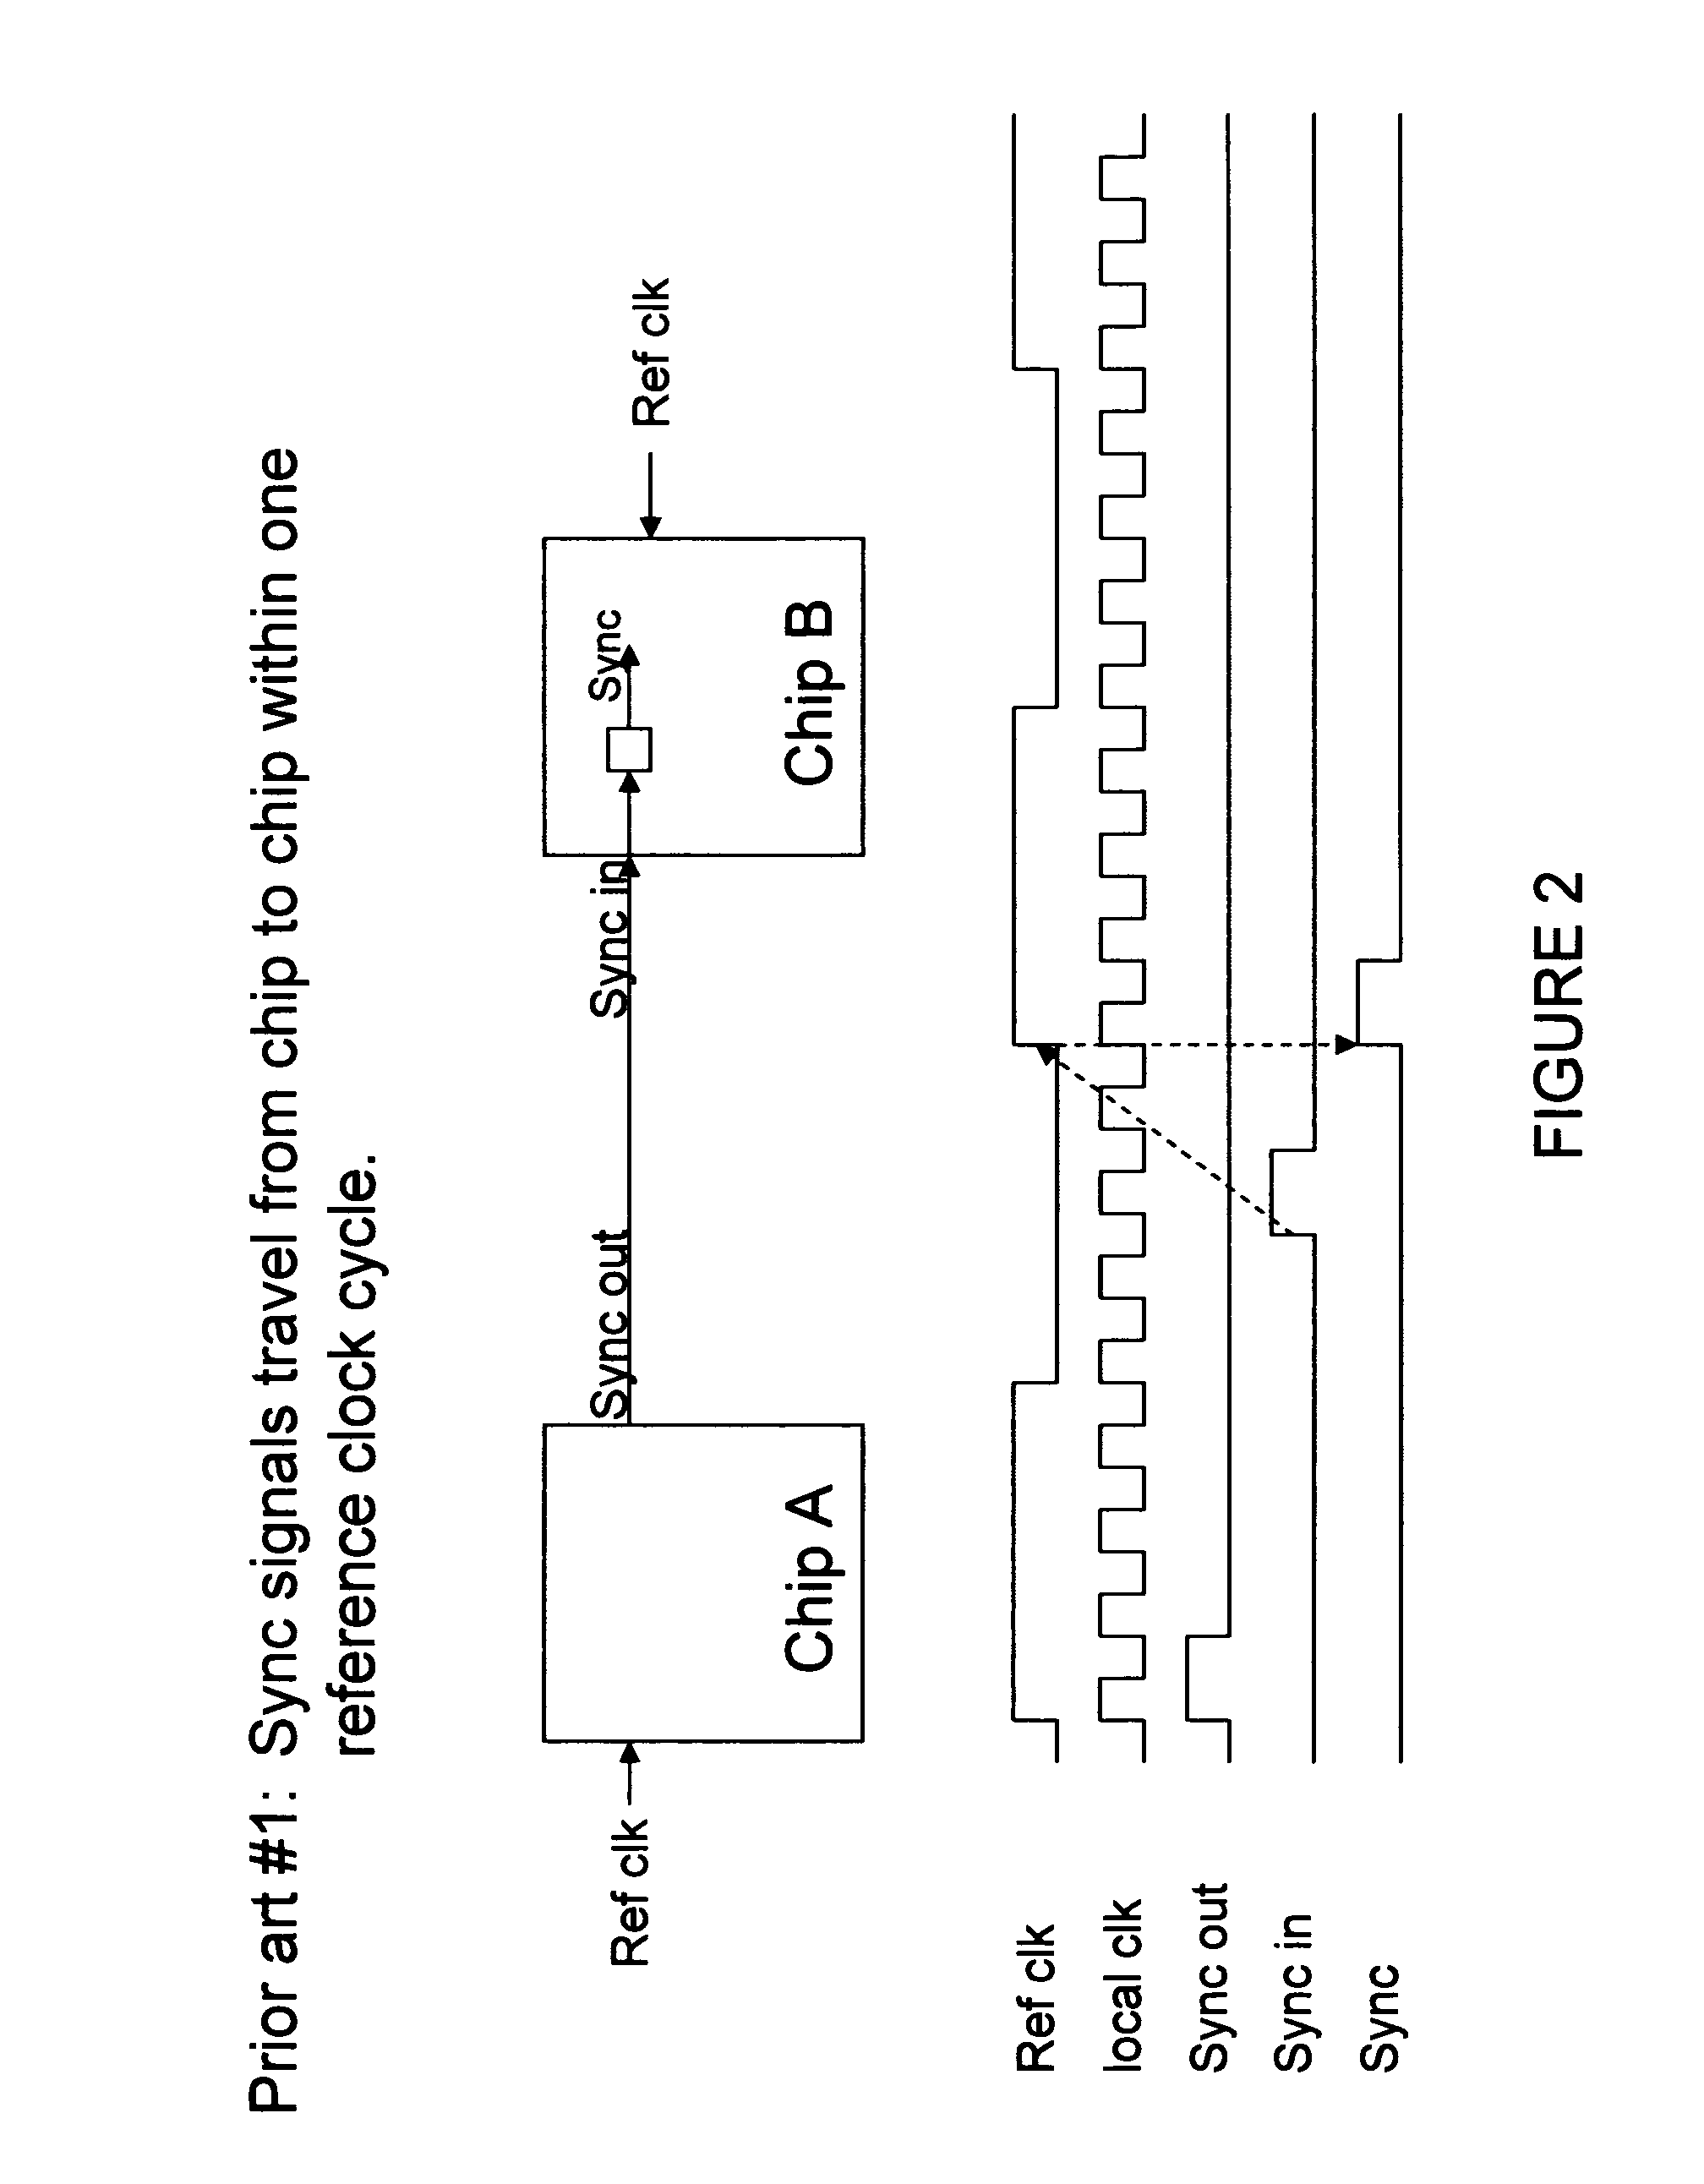 Methods to self-synchronize clocks on multiple chips in a system